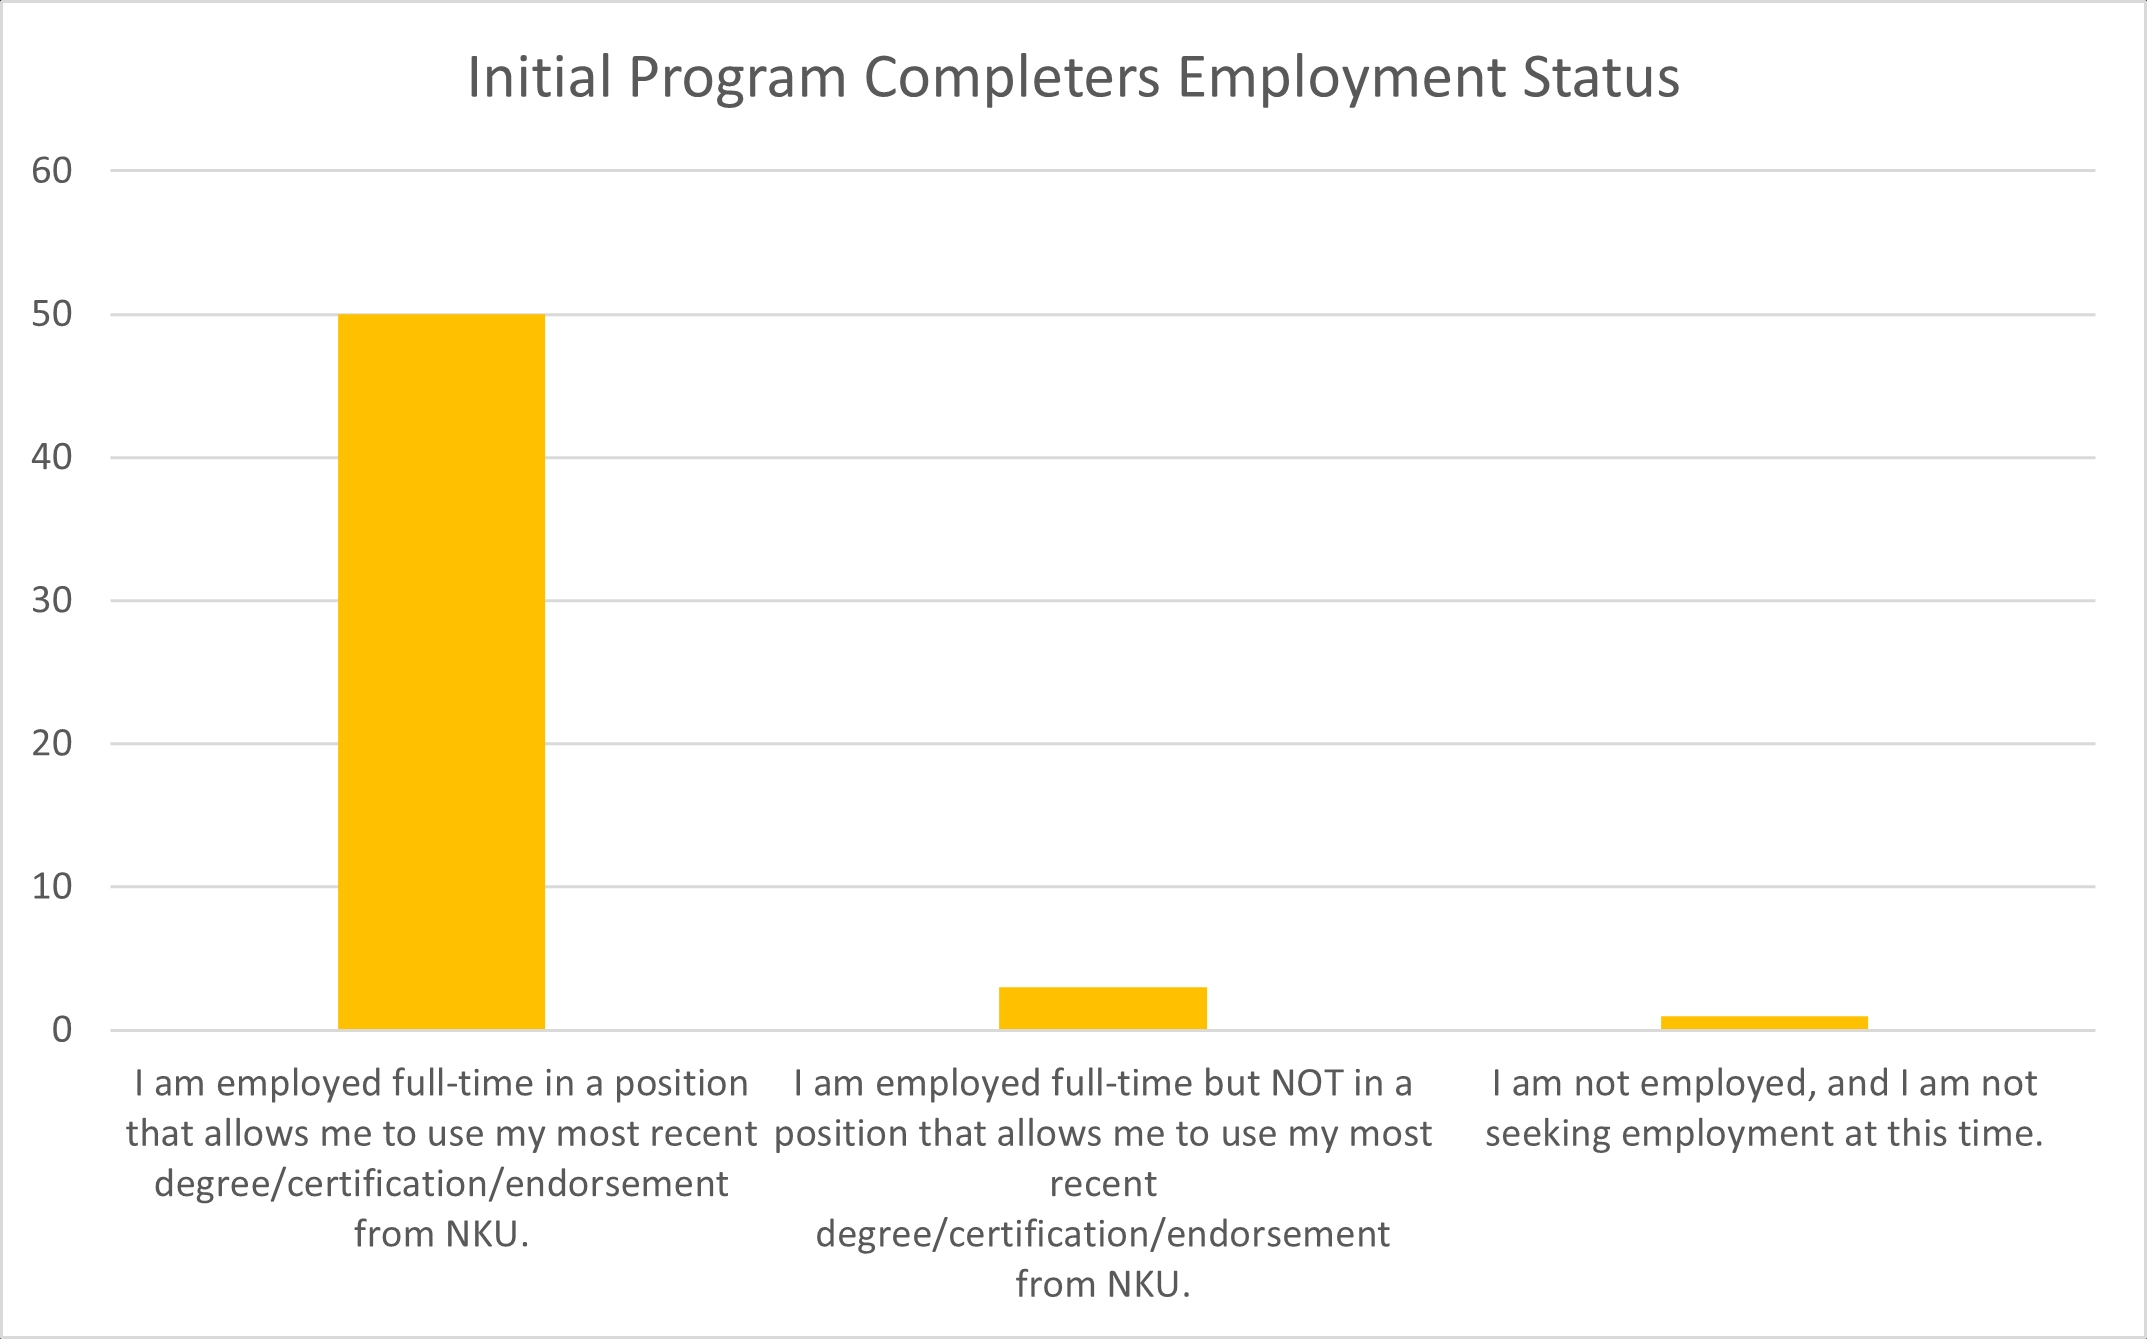 Graphs of Initial Program Completers Employment Status 